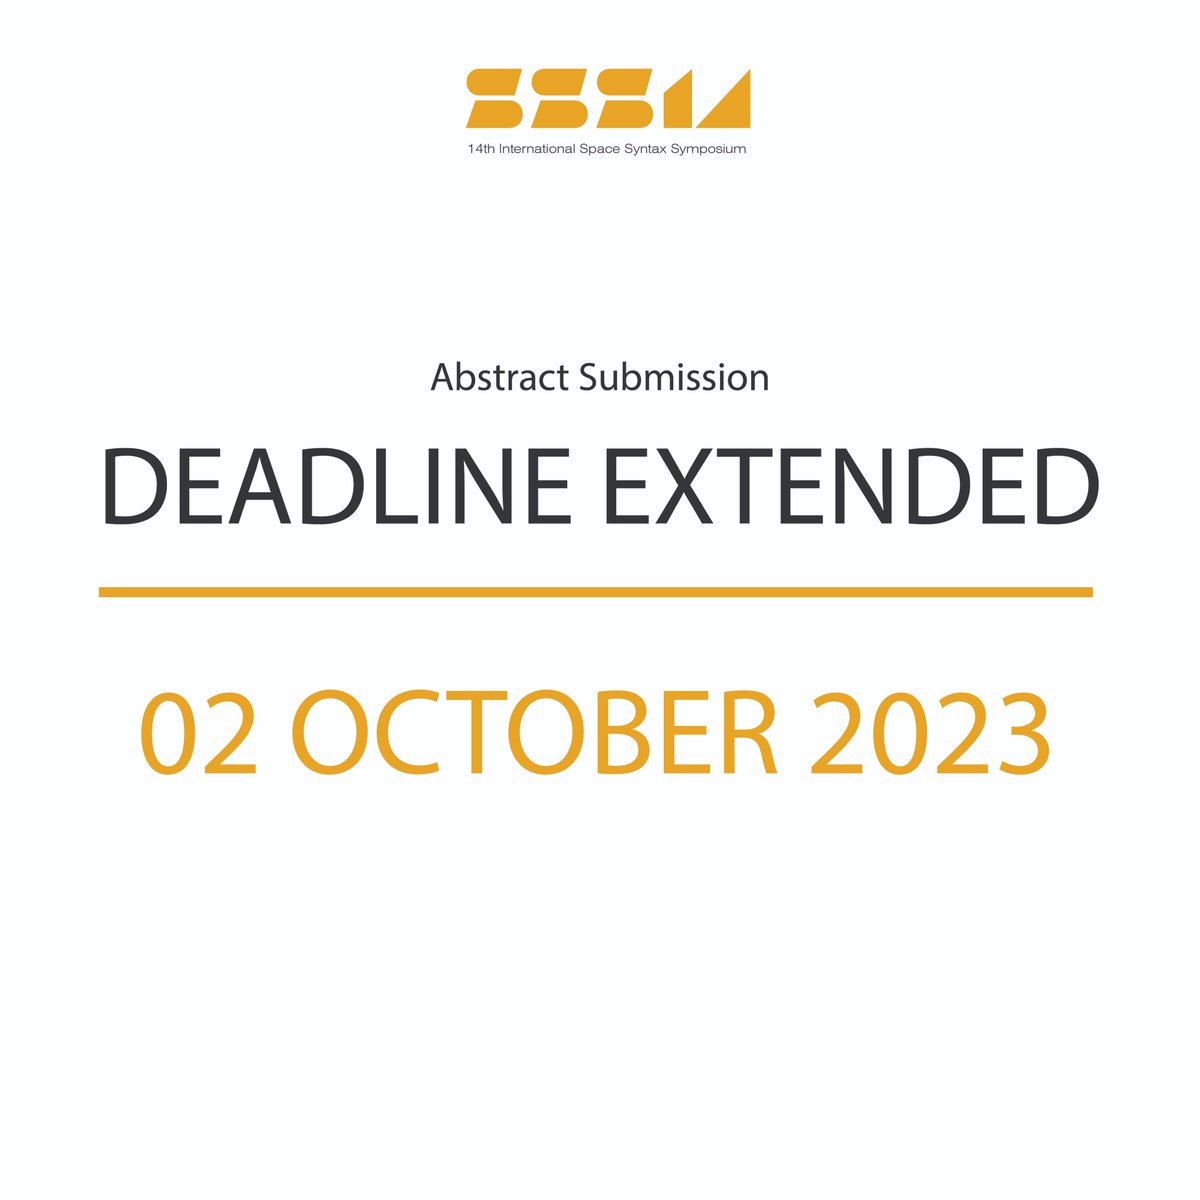 The abstract submission deadline for the 14th Space Syntax Symposium in Cyprus is now extended to October 2, 2023. Submit Your Abstracts for Papers: cyprusconferences.org/14sss/submissi… Submit Your Abstracts for Half-Day or Full-Day Workshops: cyprusconferences.org/14sss/submissi…